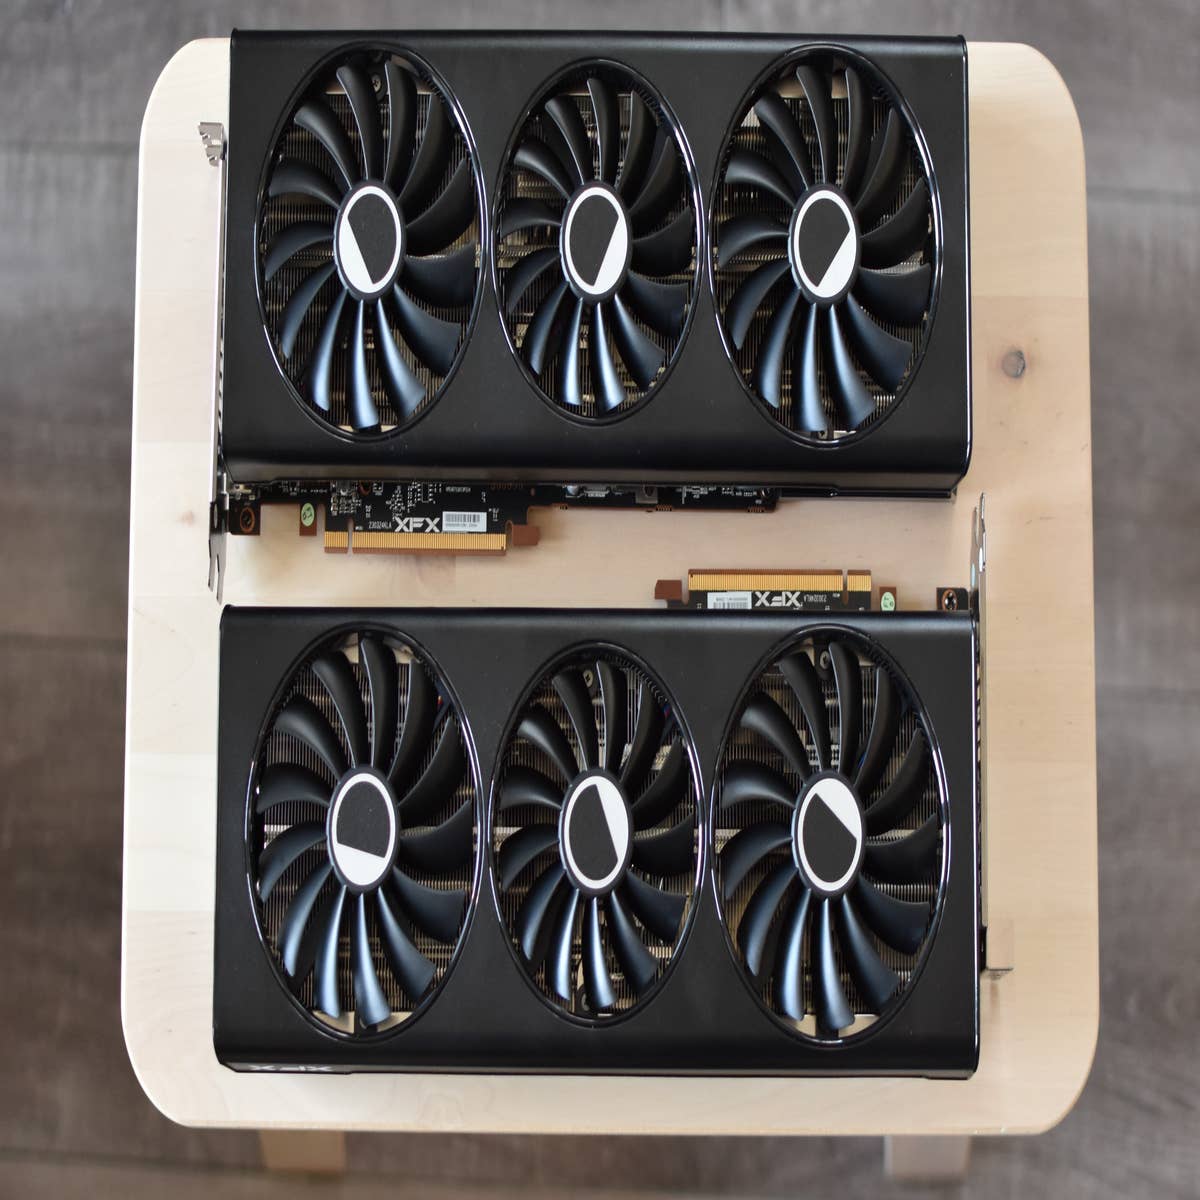 RX 7800 XT or RX 7700 XT - which is right for you? - PC Guide